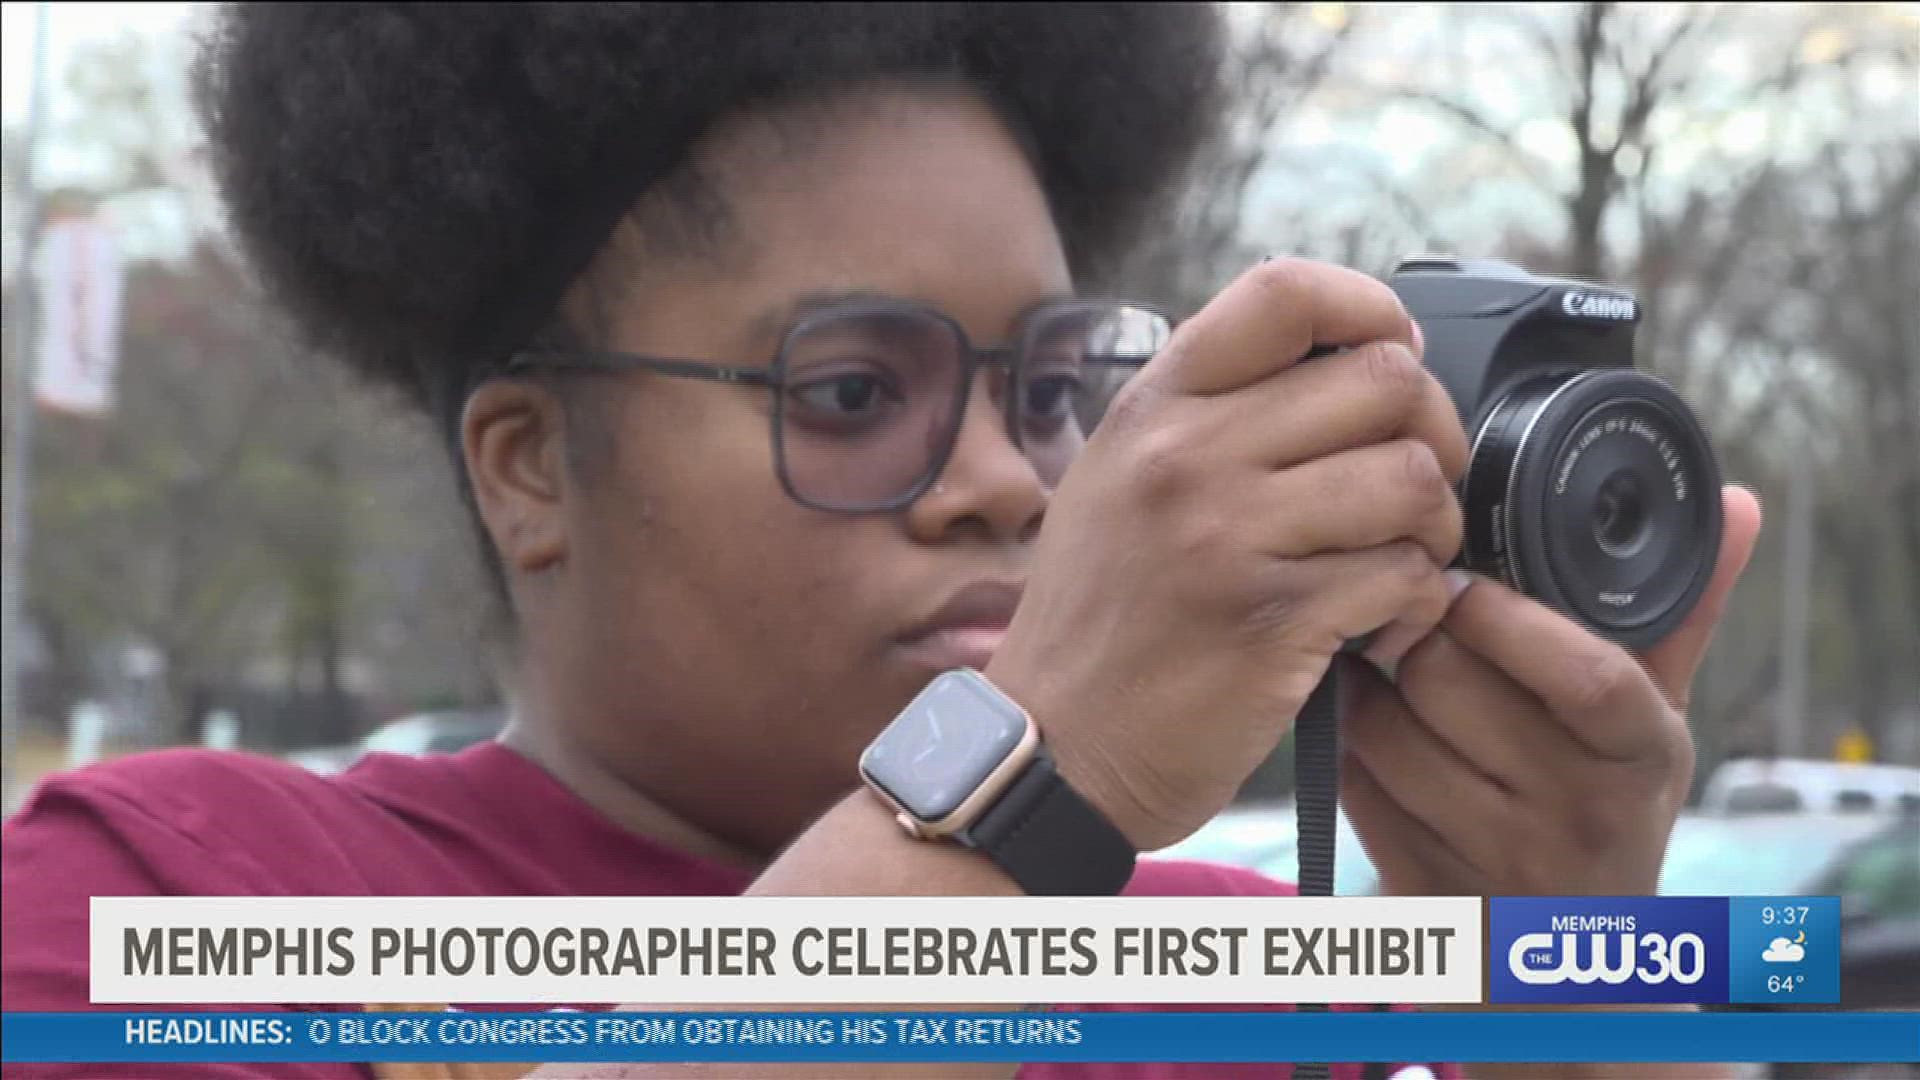 Meka Wilson’s exhibit is on display at the Ray and Joan Kroc Community Center in Midtown